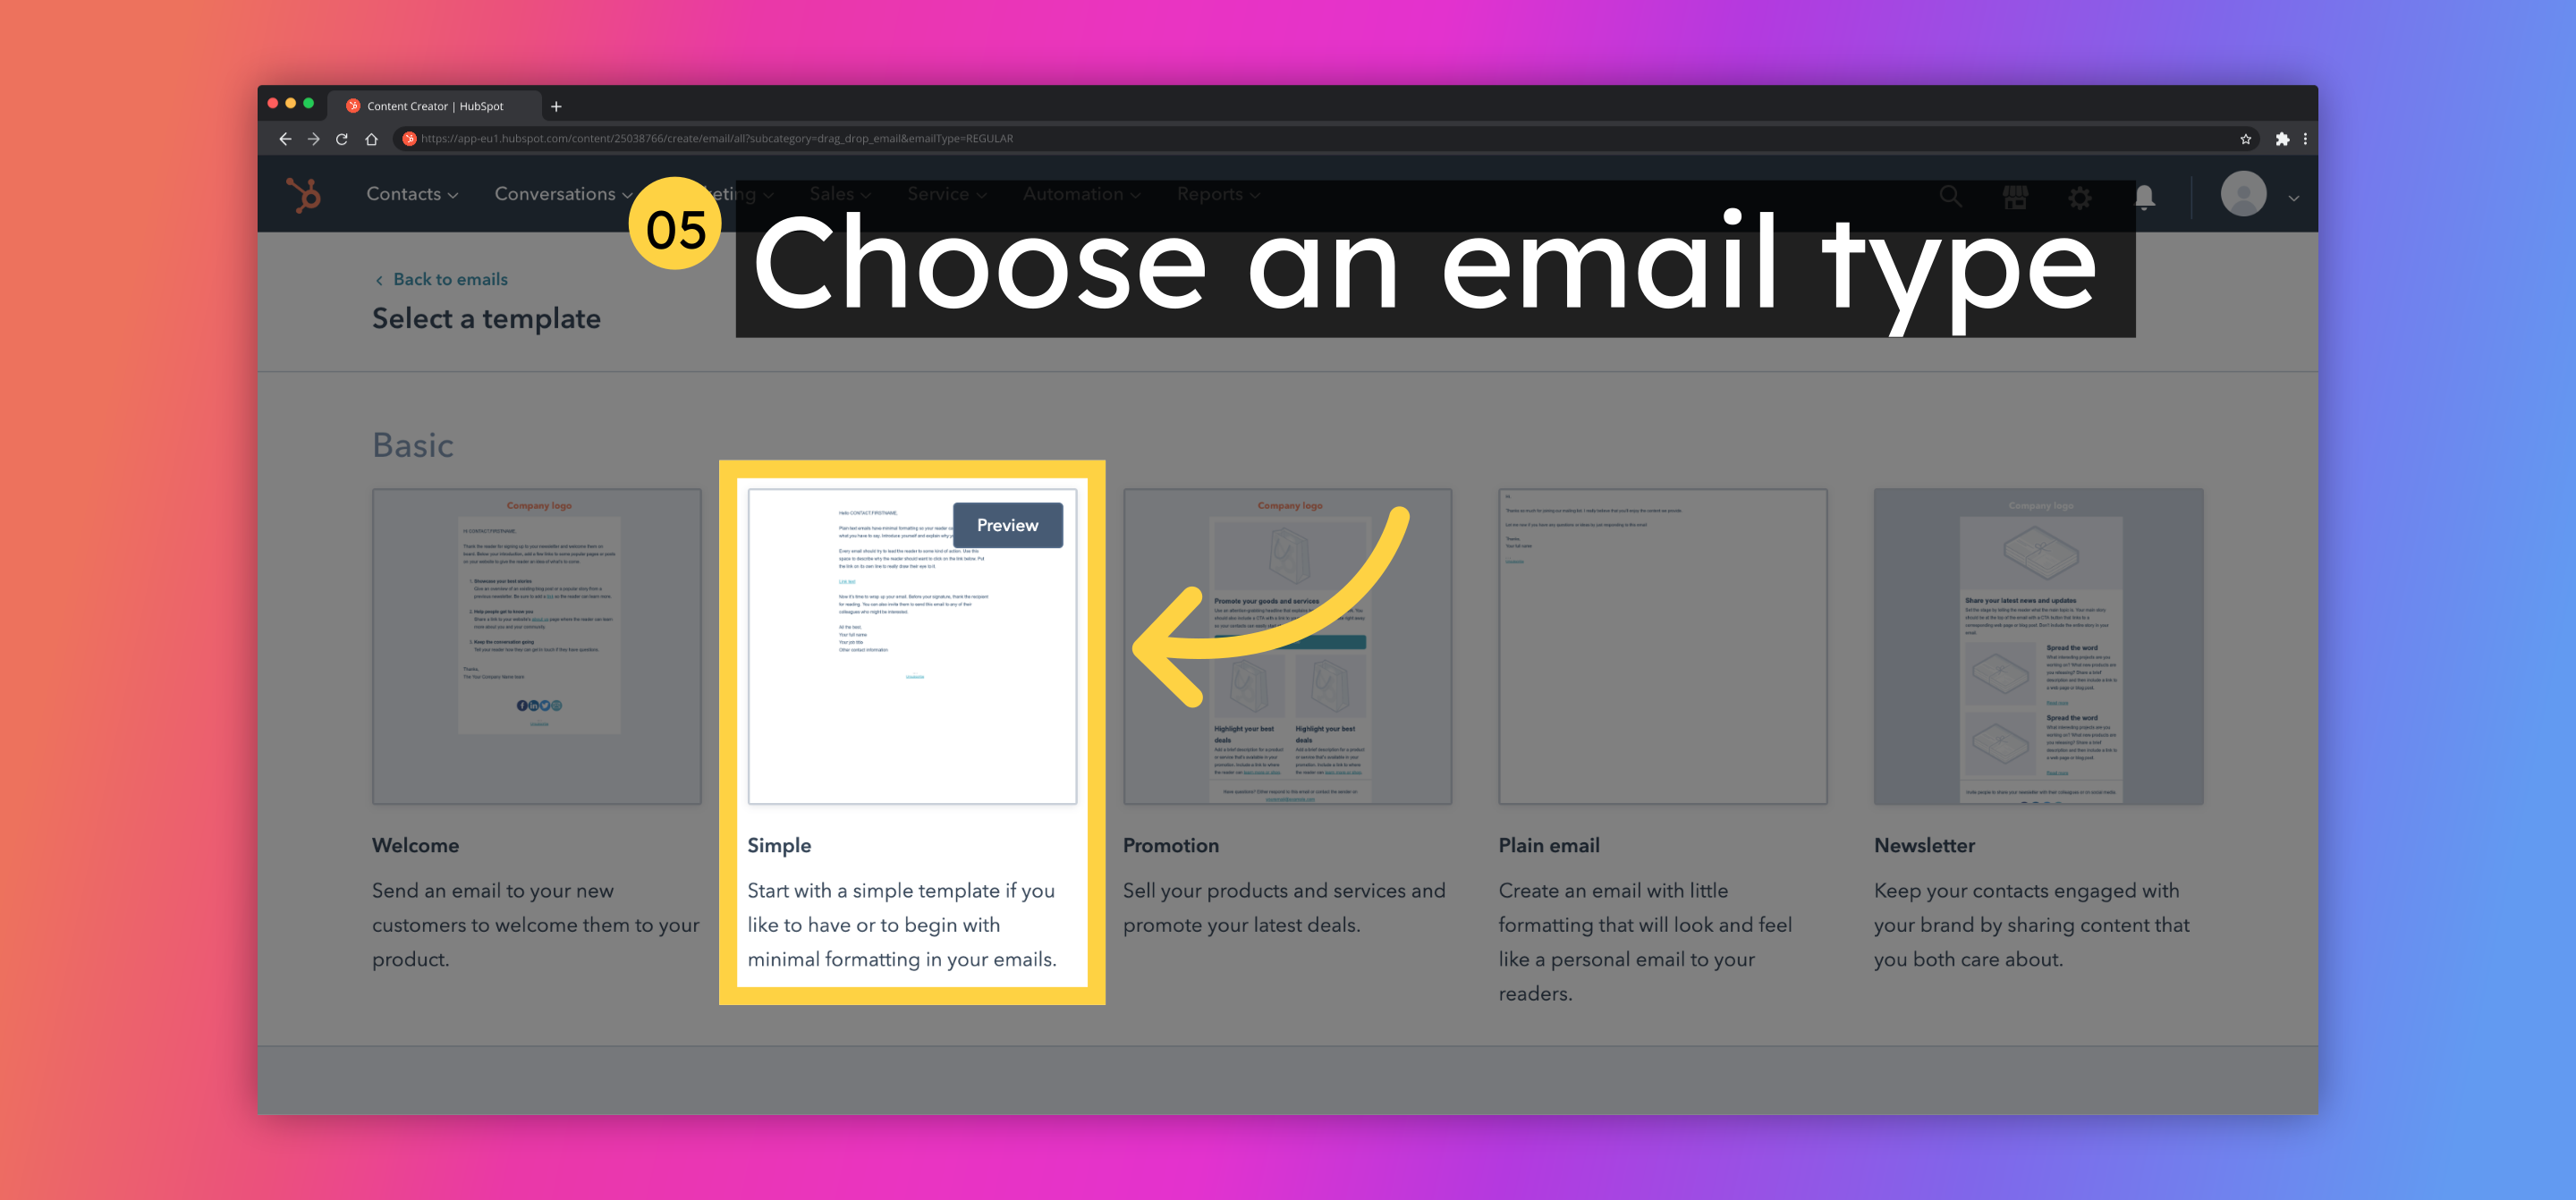 Choose an email type